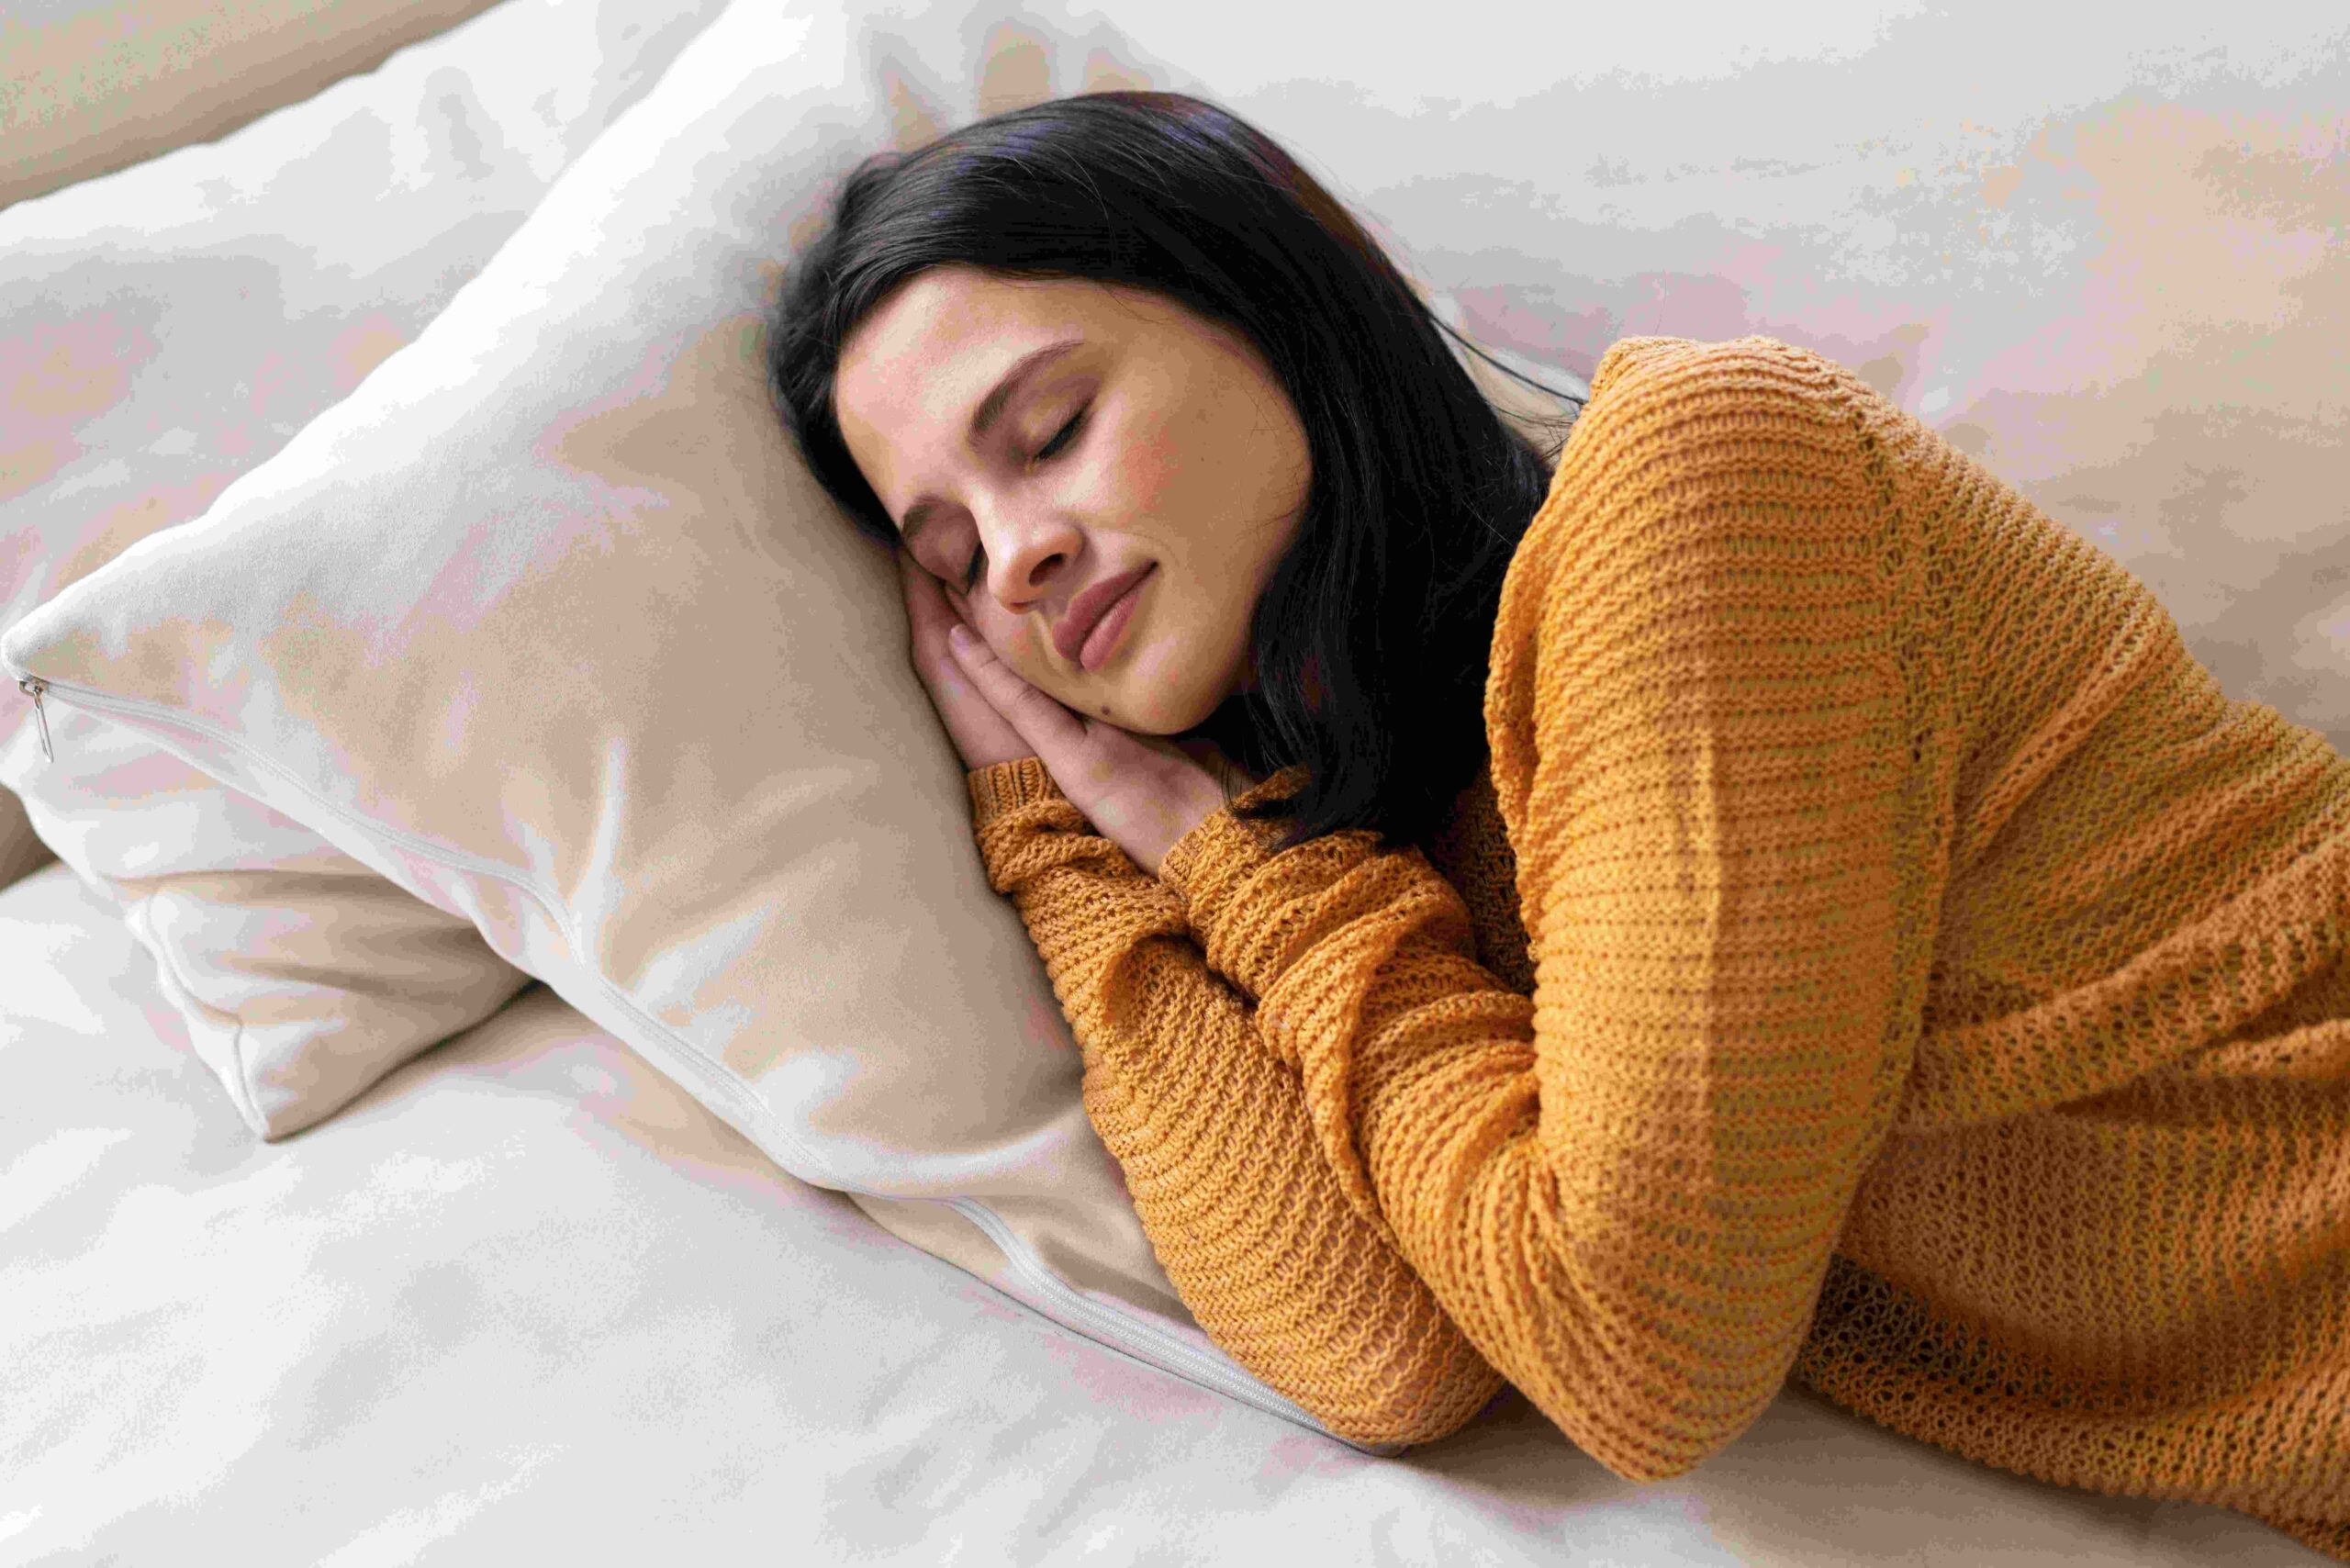 AYURVEDIC DOCTOR GIVES TIPS TO ACHIEVE SUPERIOR SLEEP